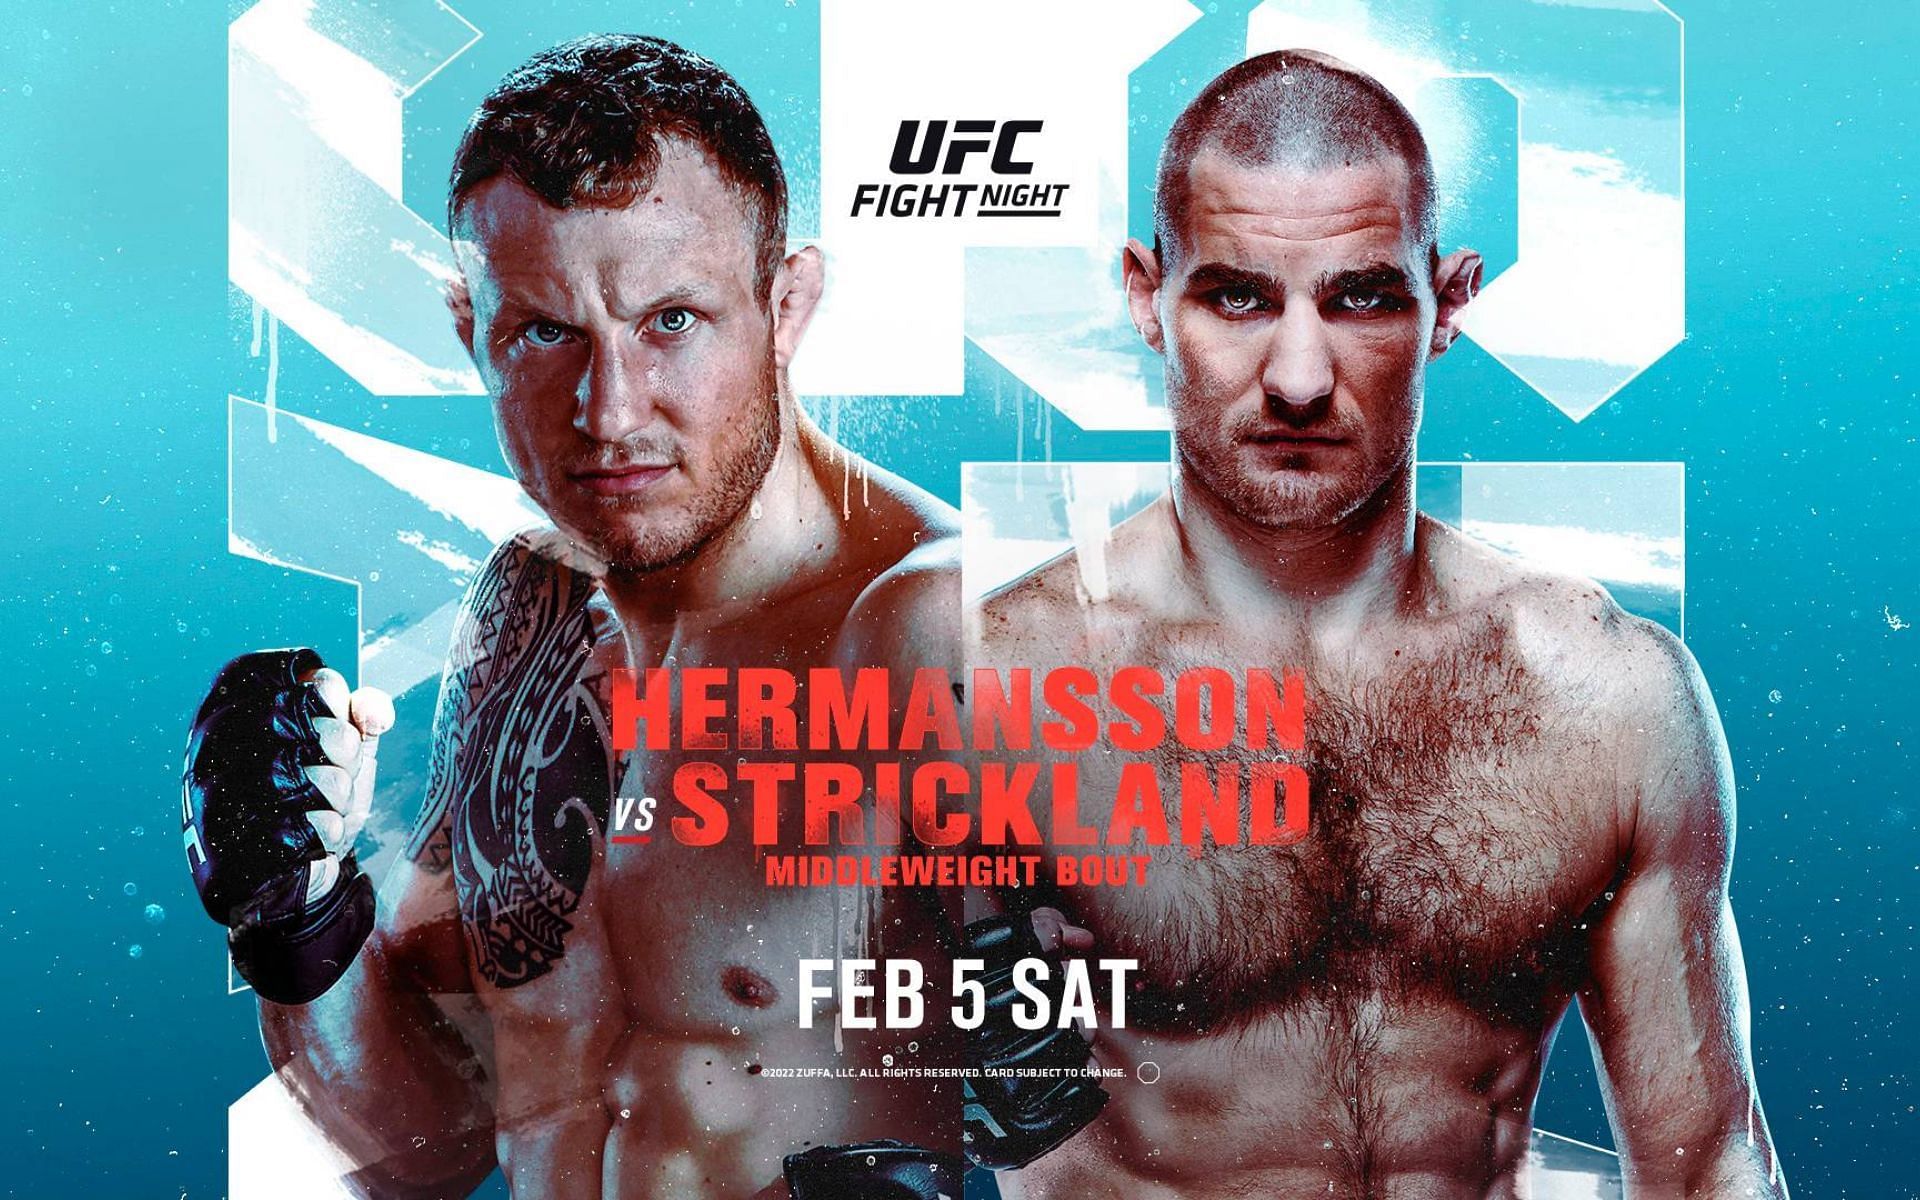 This weekend&rsquo;s UFC headline bout features middleweights Jack Hermansson and Sean Strickland.